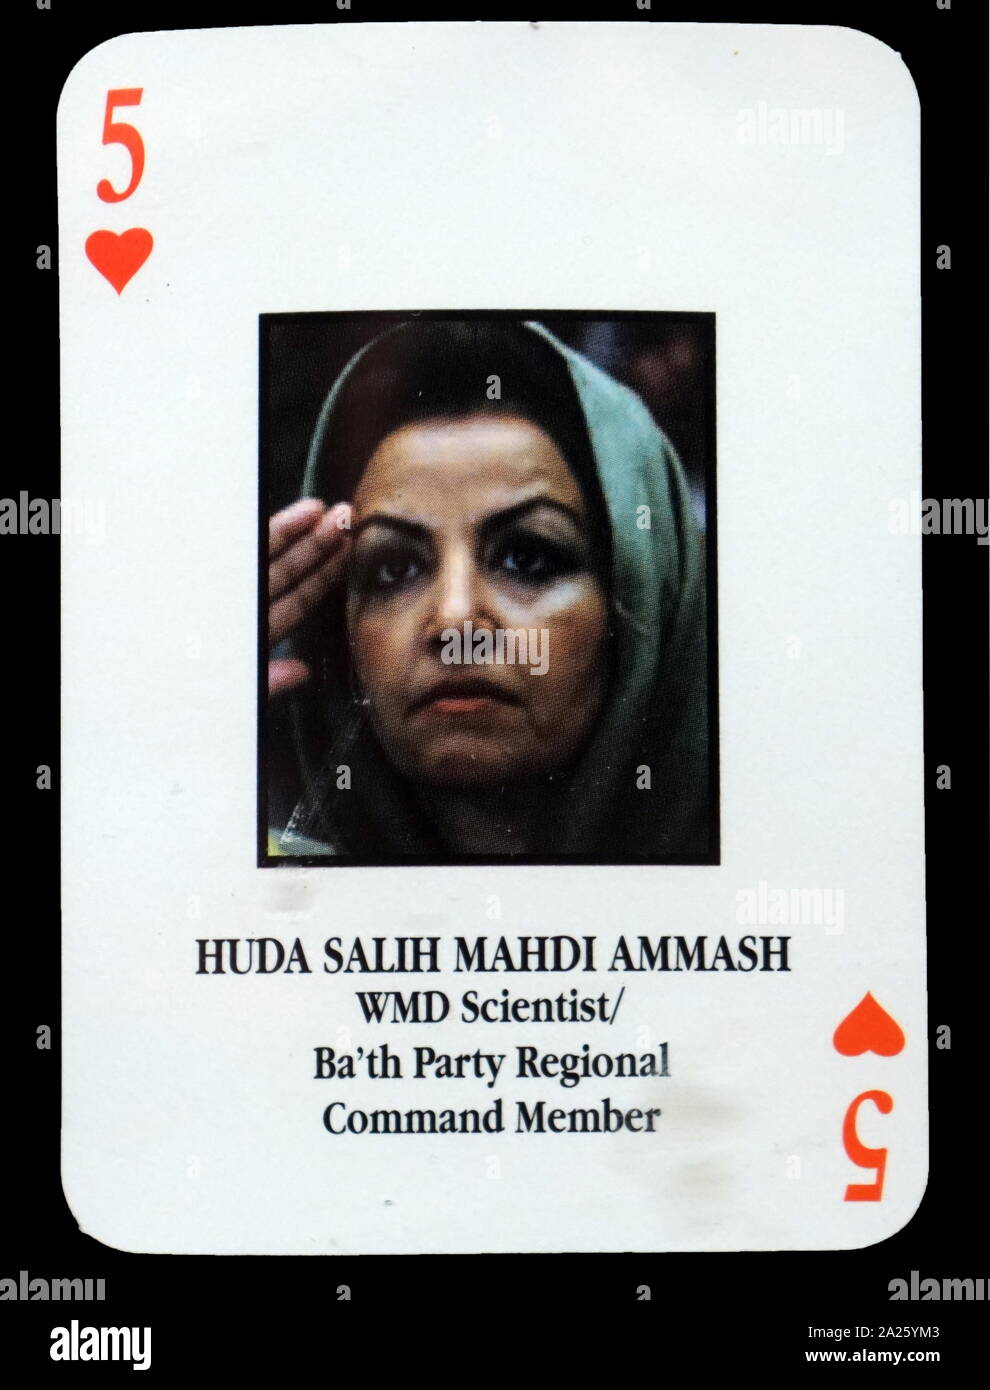 Most-wanted Iraqi playing cards - Huda Salih Mahdi Ammash (WMD Scientist/ Ba'th Party Regional Command Member). The U.S. military developed a set of playing cards to help troop identify the most-wanted members of President Saddam Hussein's government during the 2003 invasion of Iraq. Stock Photo